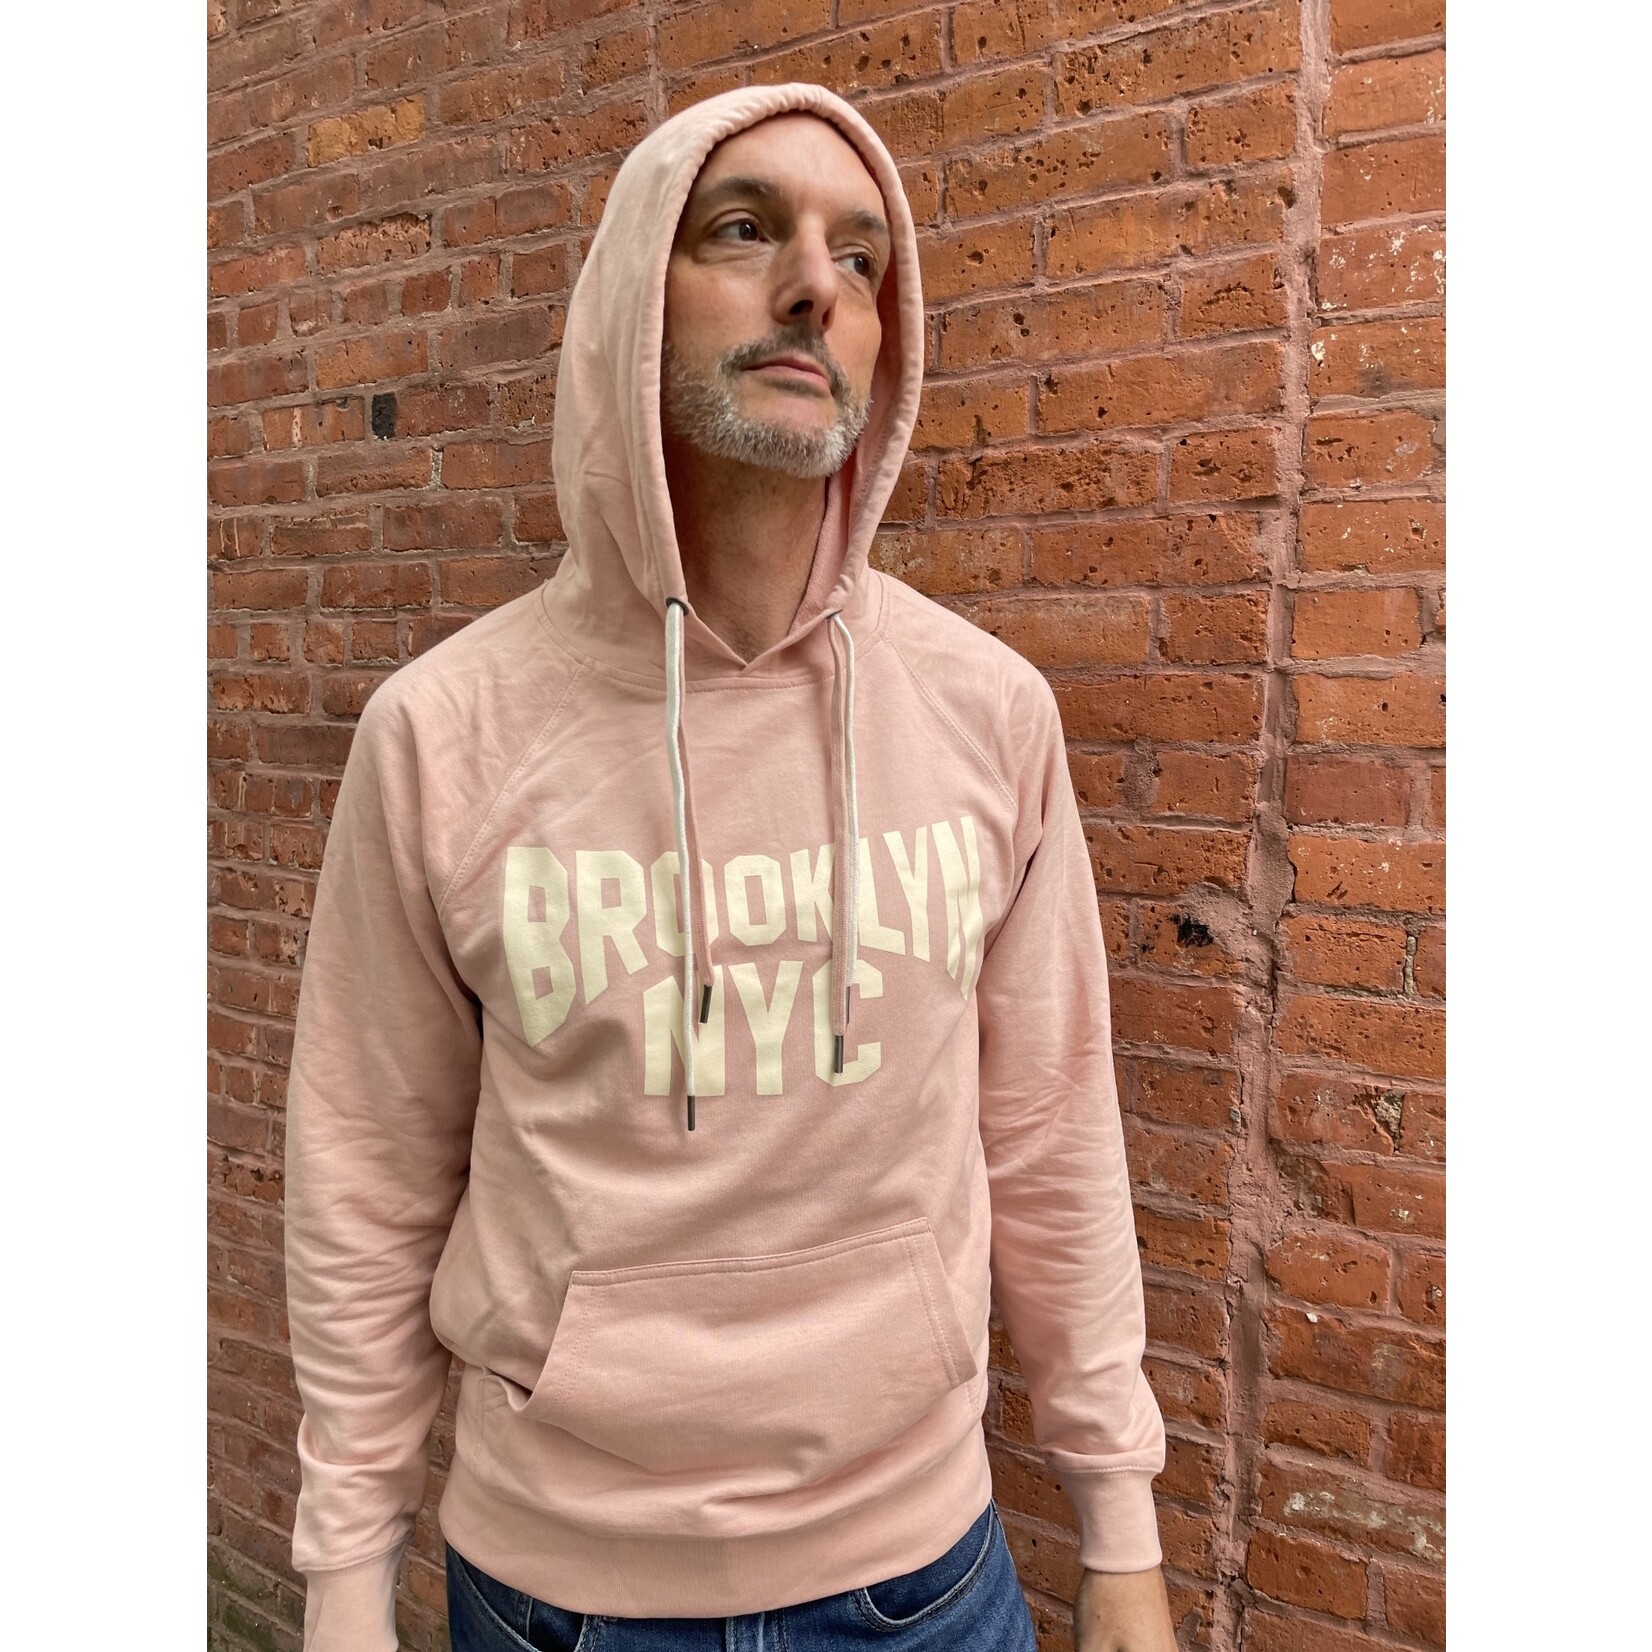 Exit9 Gift Emporium Classic Brooklyn Midweight Hoodie in Rose